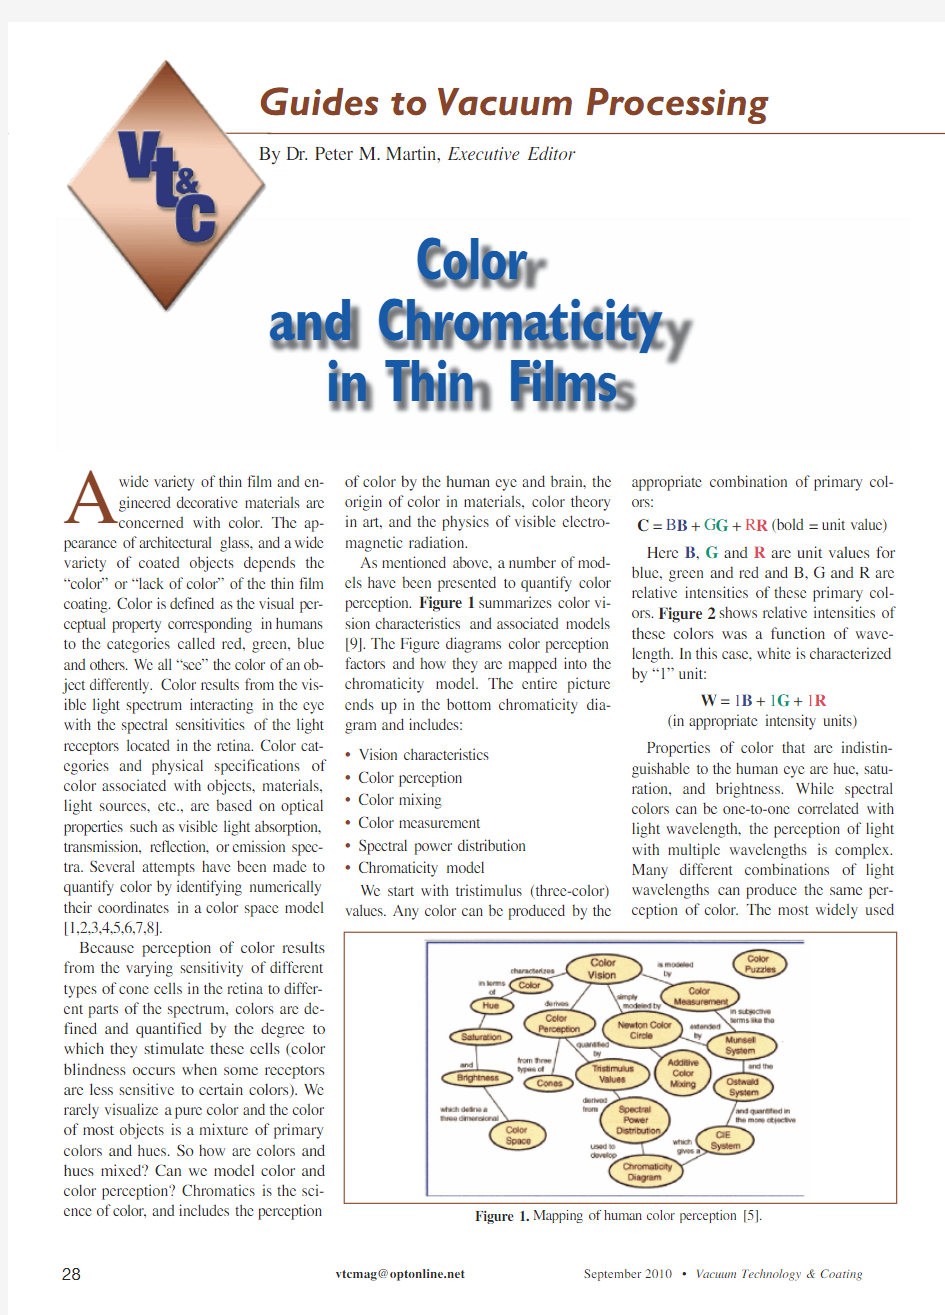 Color and chromaticity in thin films, from VTC100901